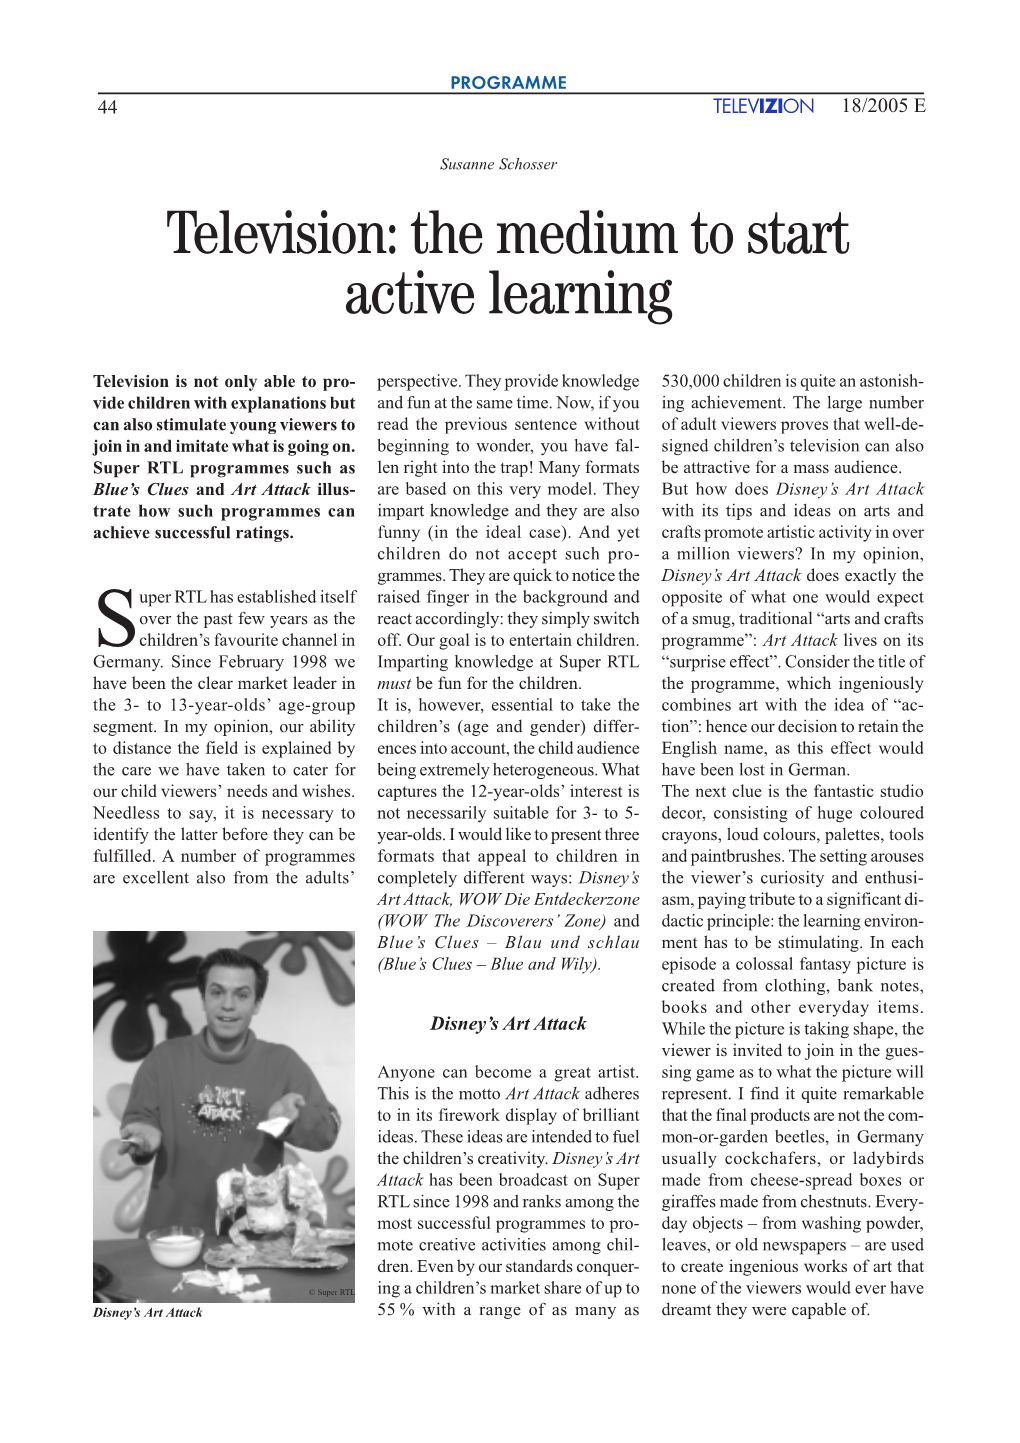 Television: the Medium to Start Active Learning